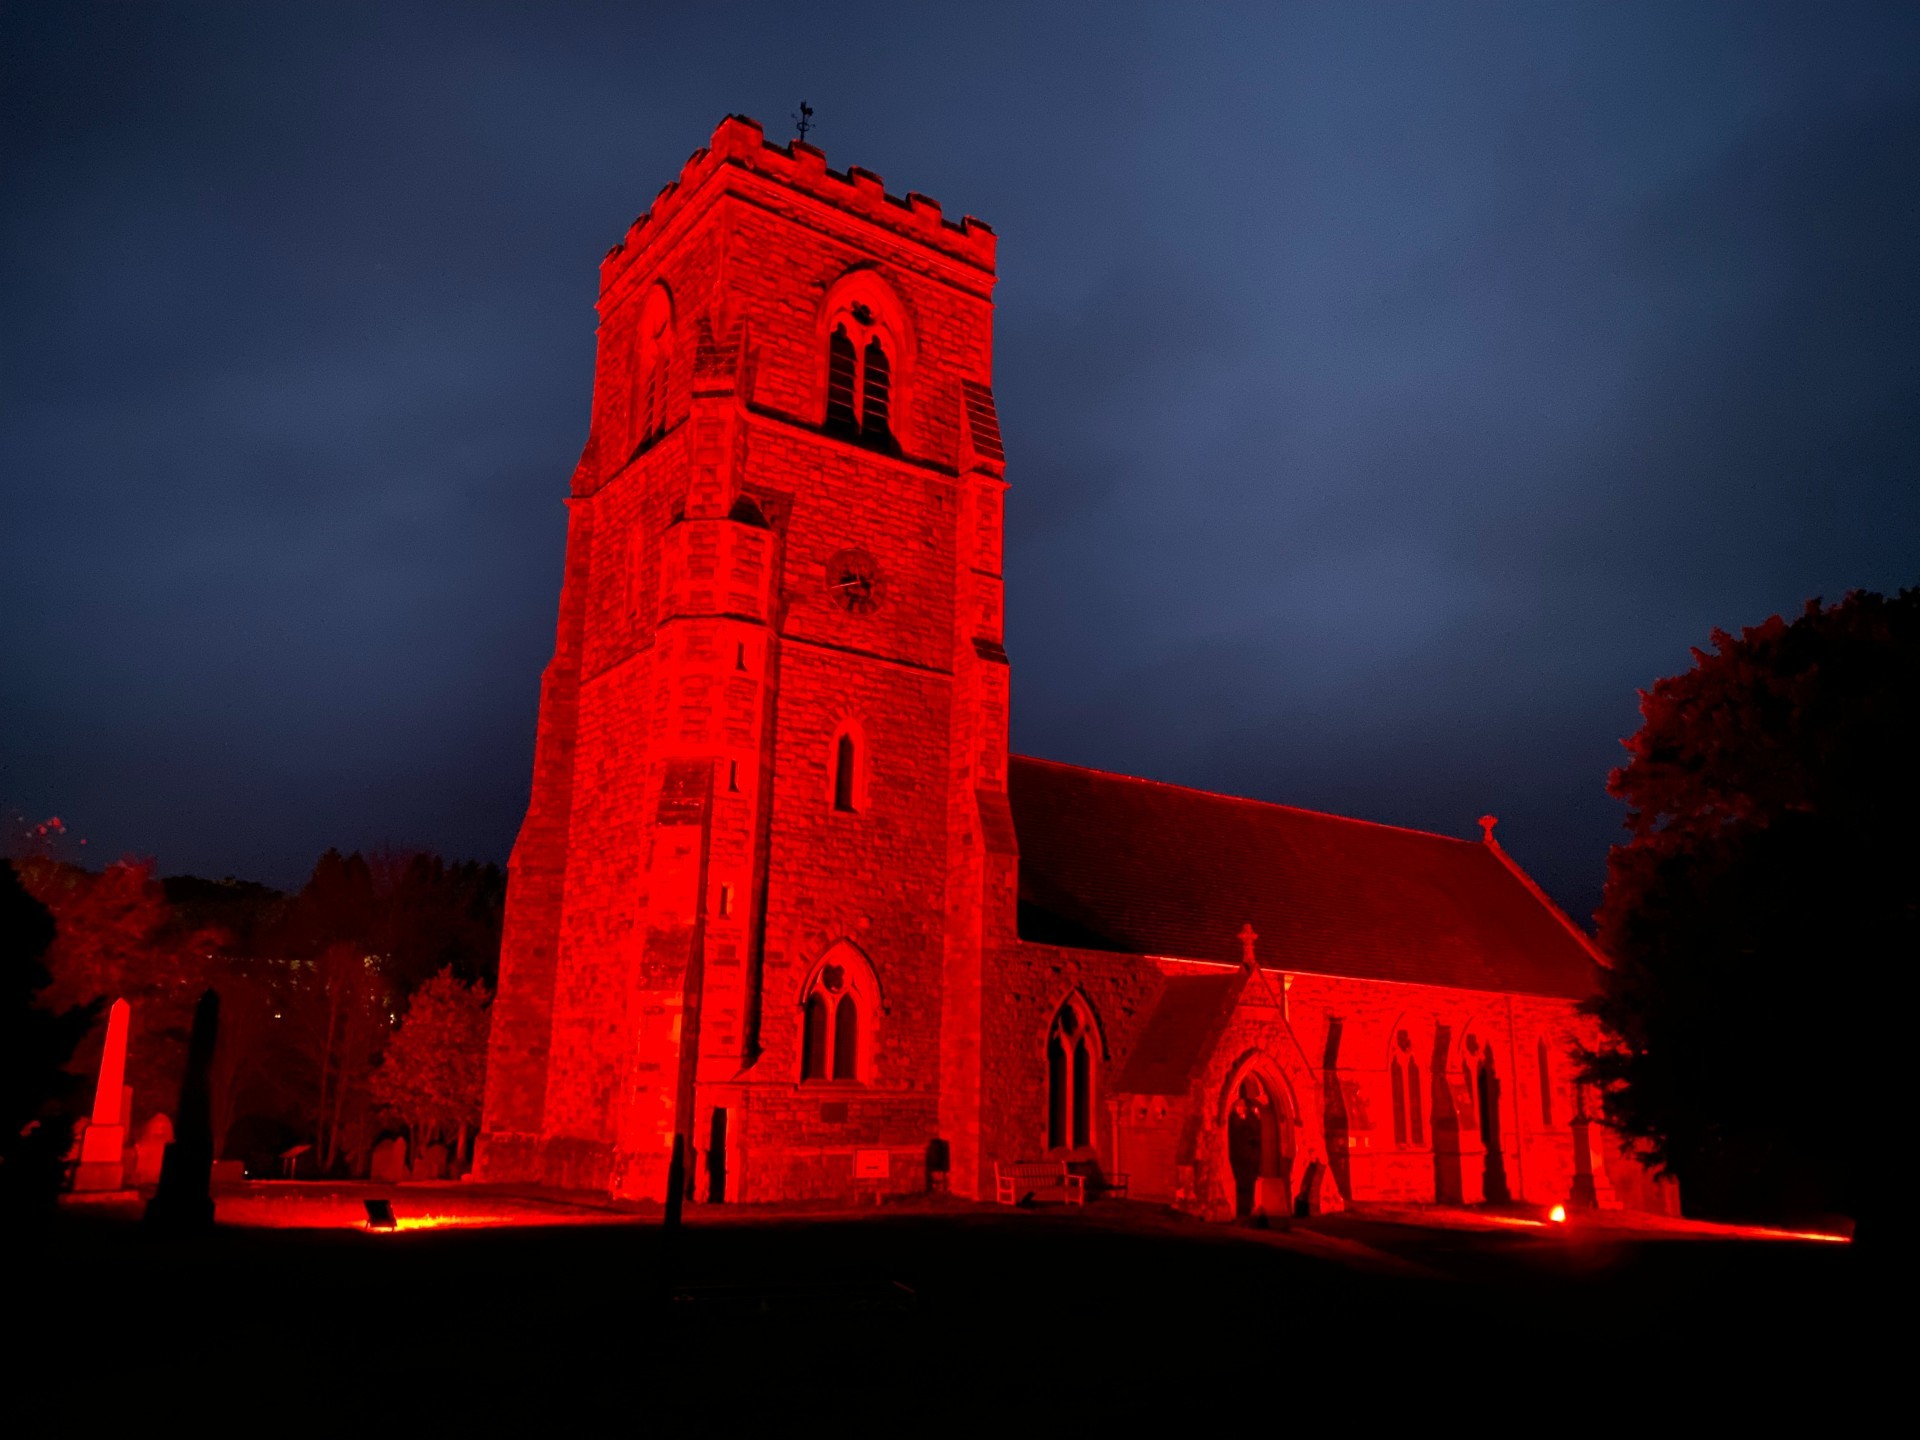 St Marys Church in Llanfair Caereinion was lit up in red as part of the tradional Remembrance traditions. Picture by Anwen Parry/County Times